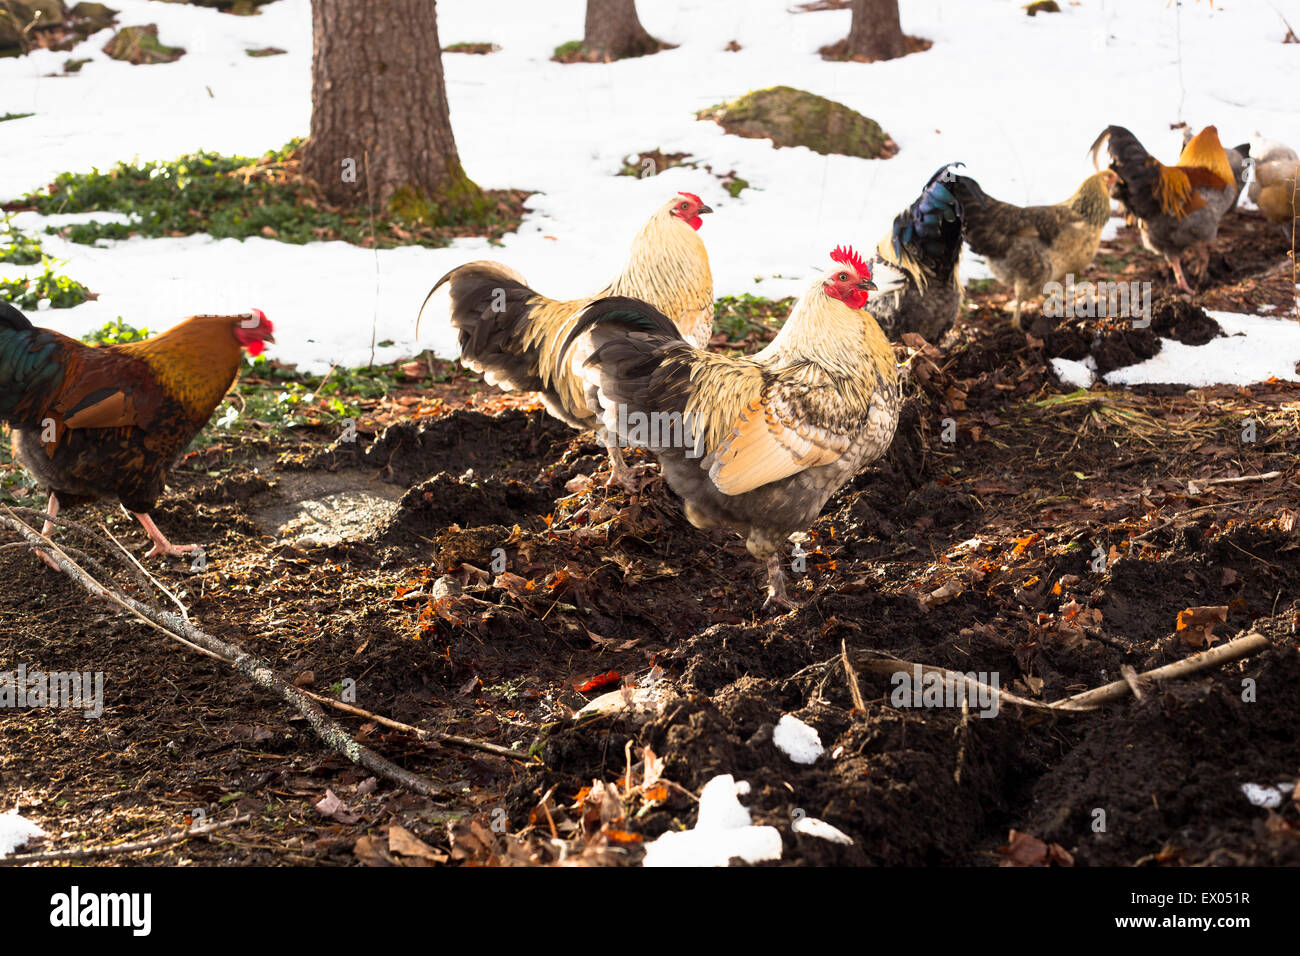 Medium group of free range chickens in snowy landscape Stock Photo